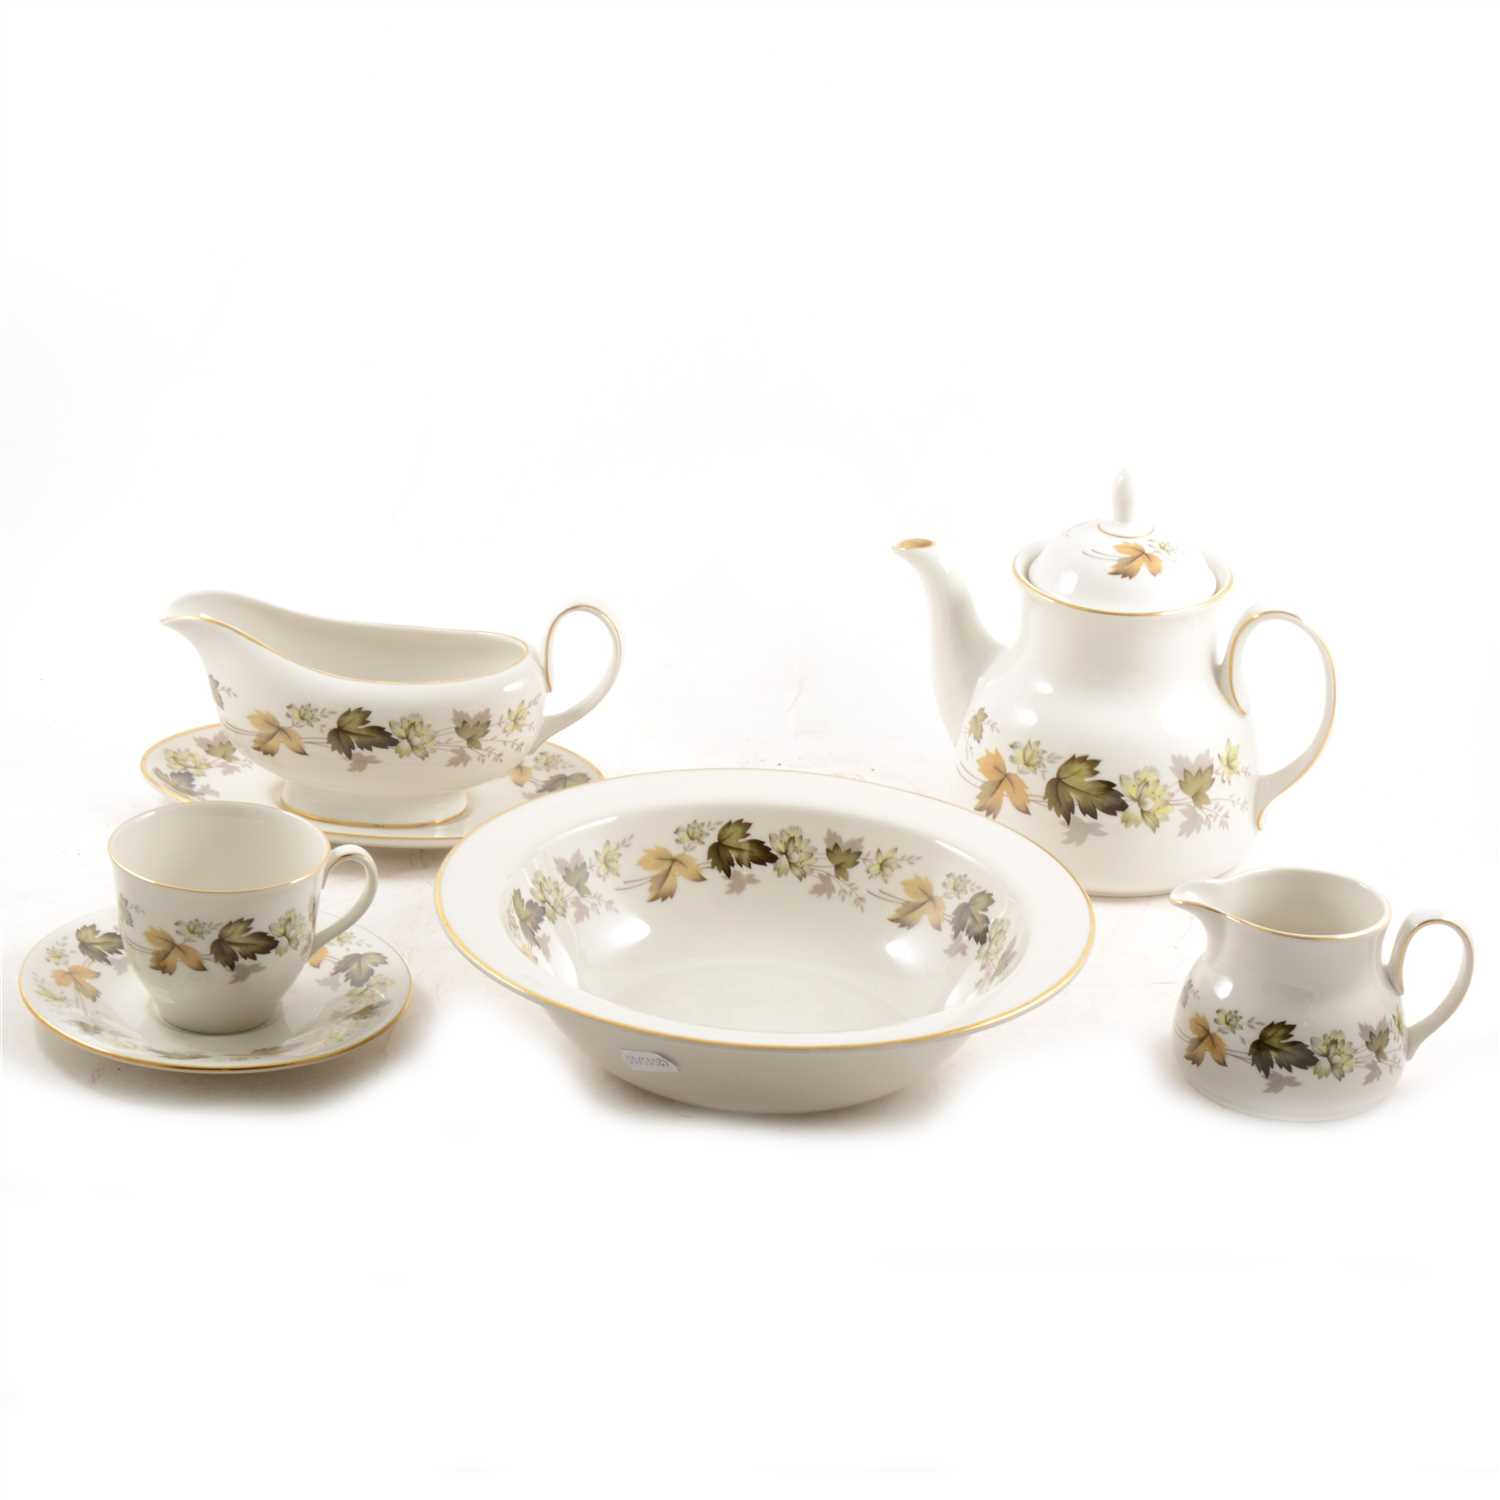 Lot 66 - Royal Doulton part dinner, breakfast, and tea service, Larchmont pattern.